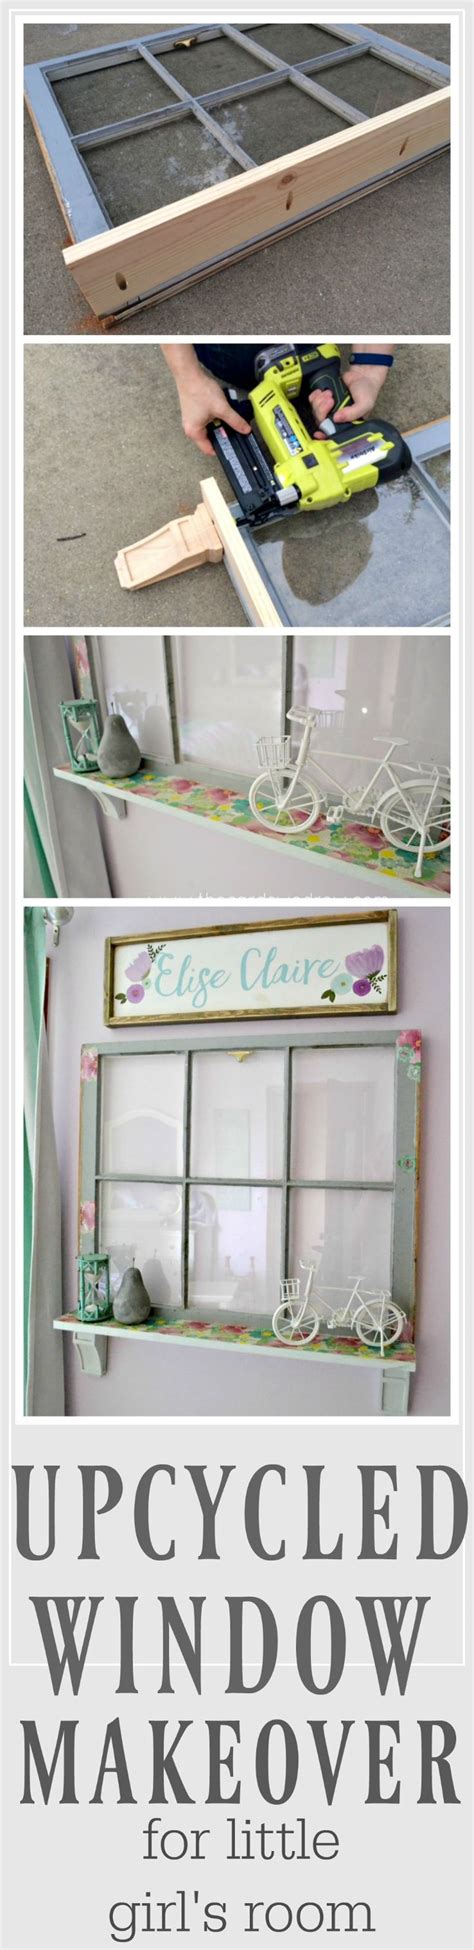 Upcycled Window Makeover Home Crafts Diy Upcycled Crafts